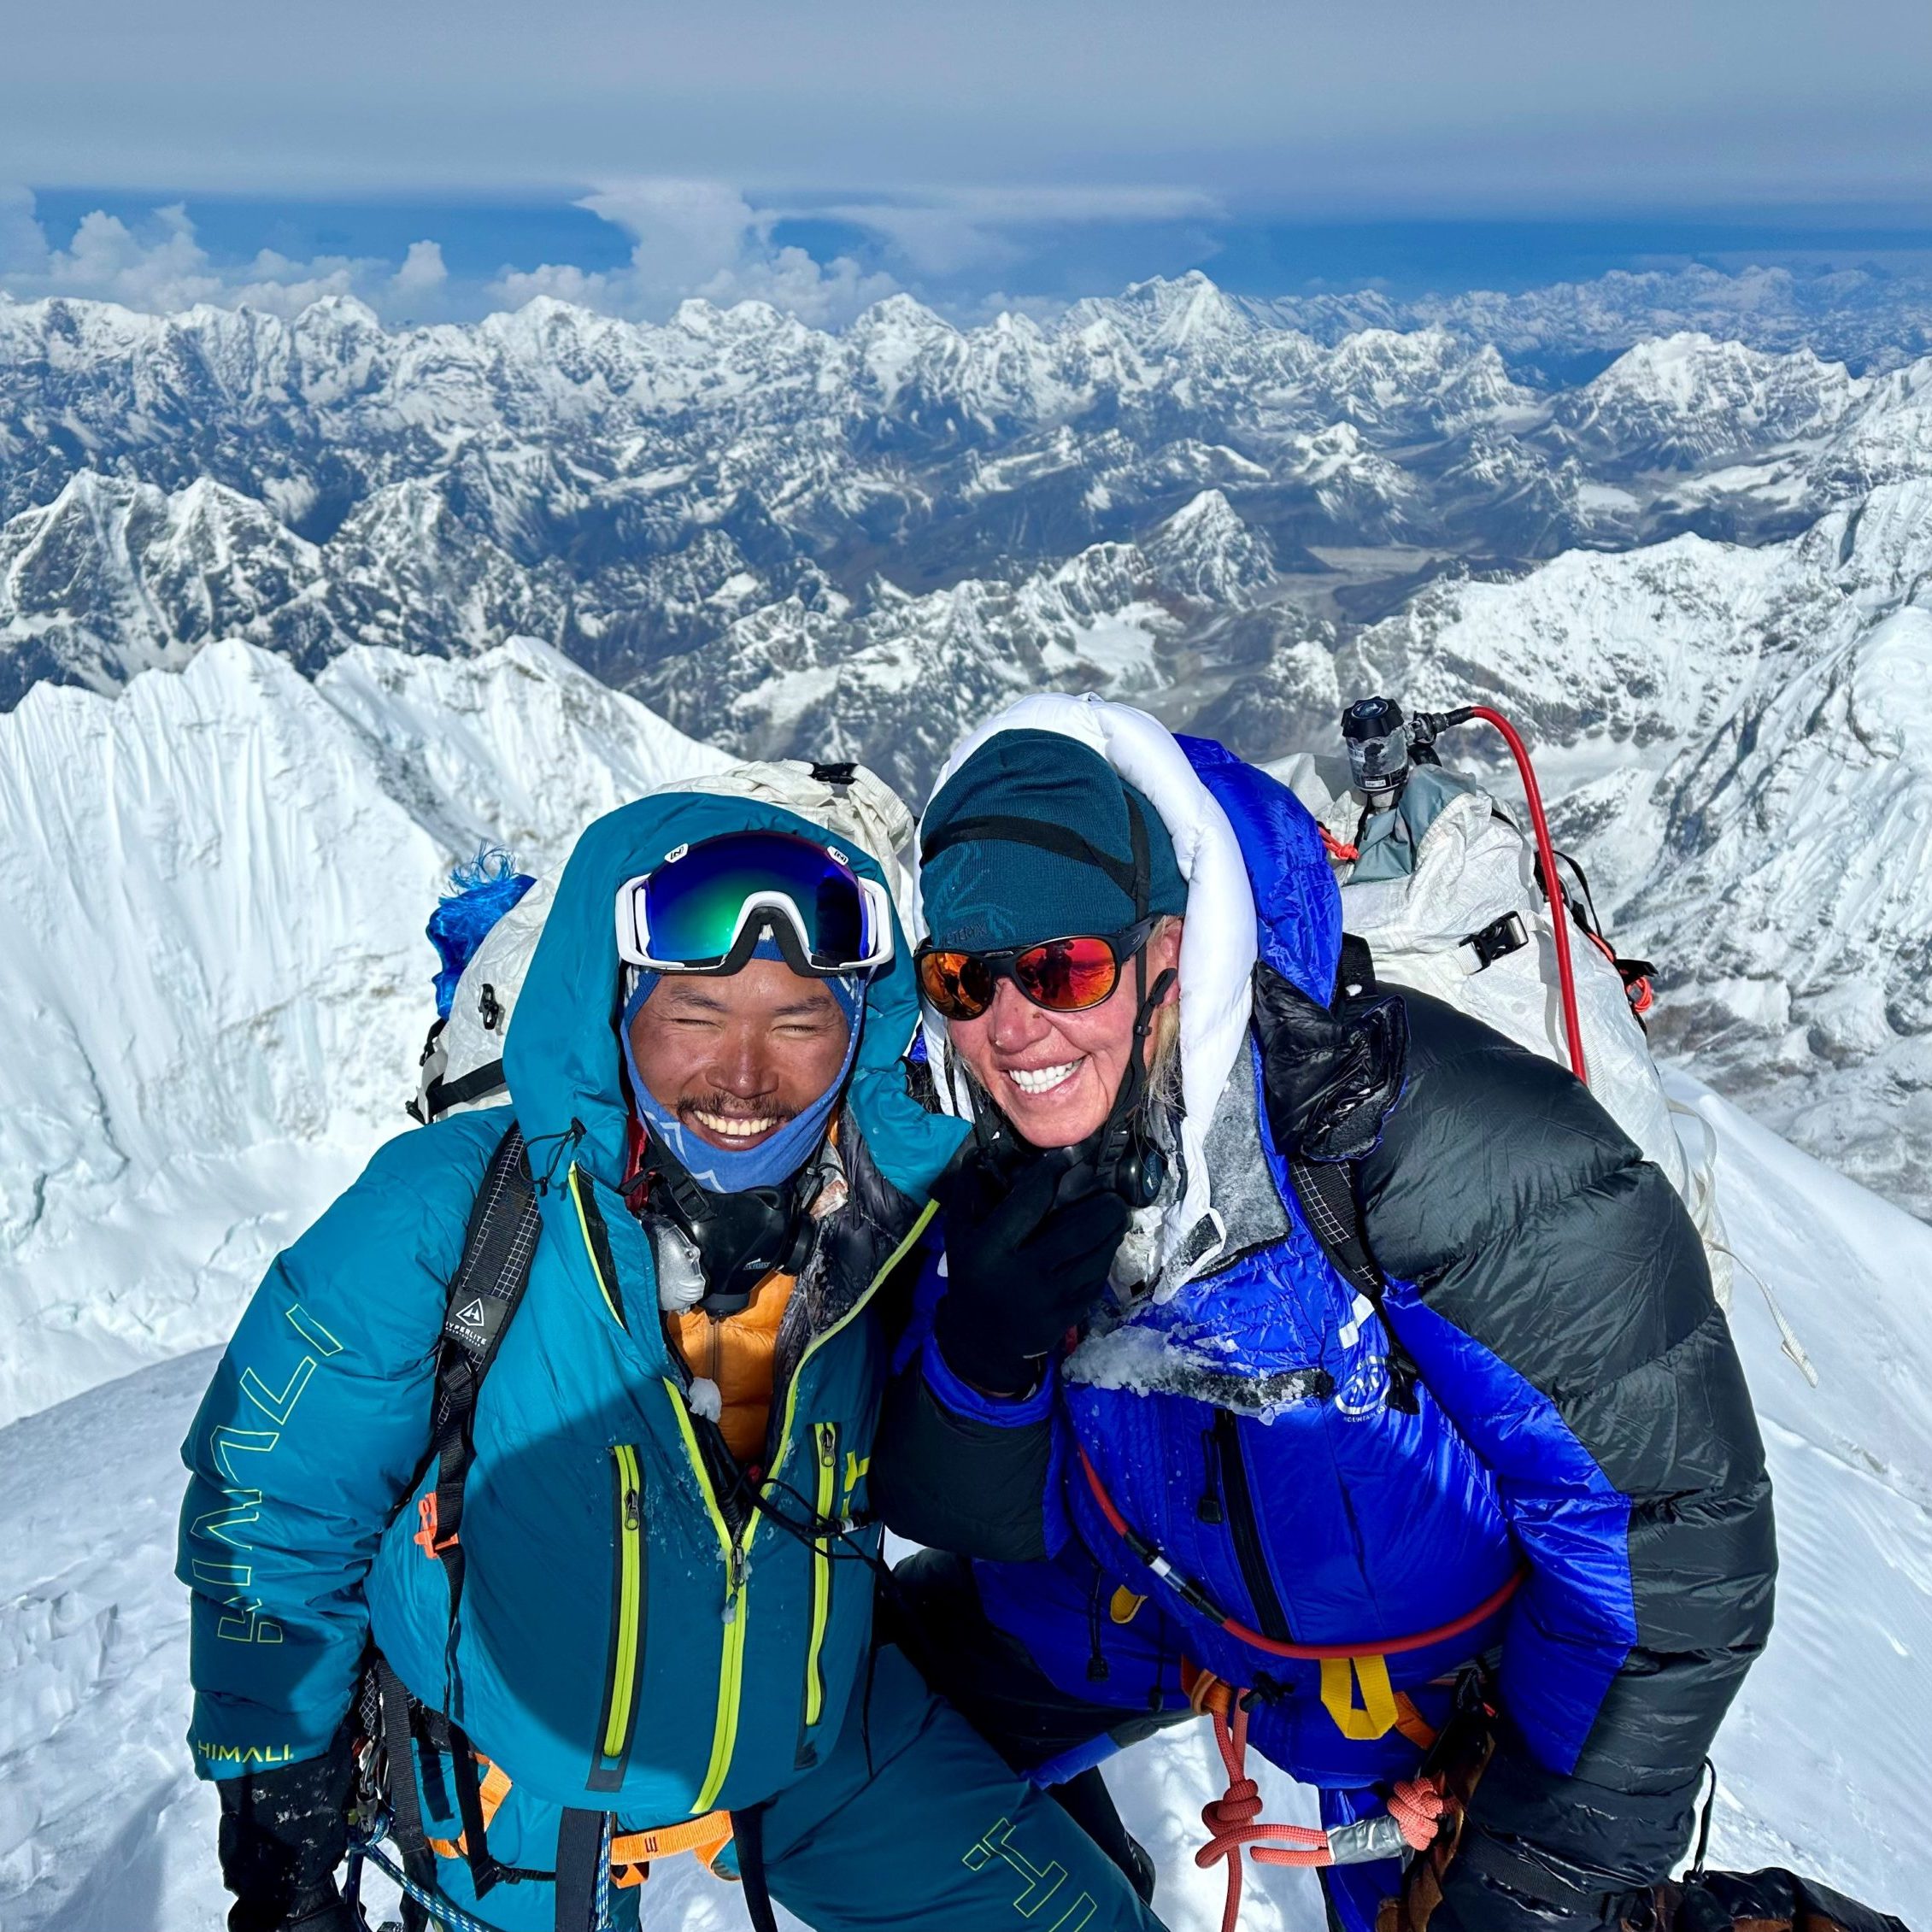 Julie and Tendi Sherpa on the summit of Mount Everest.